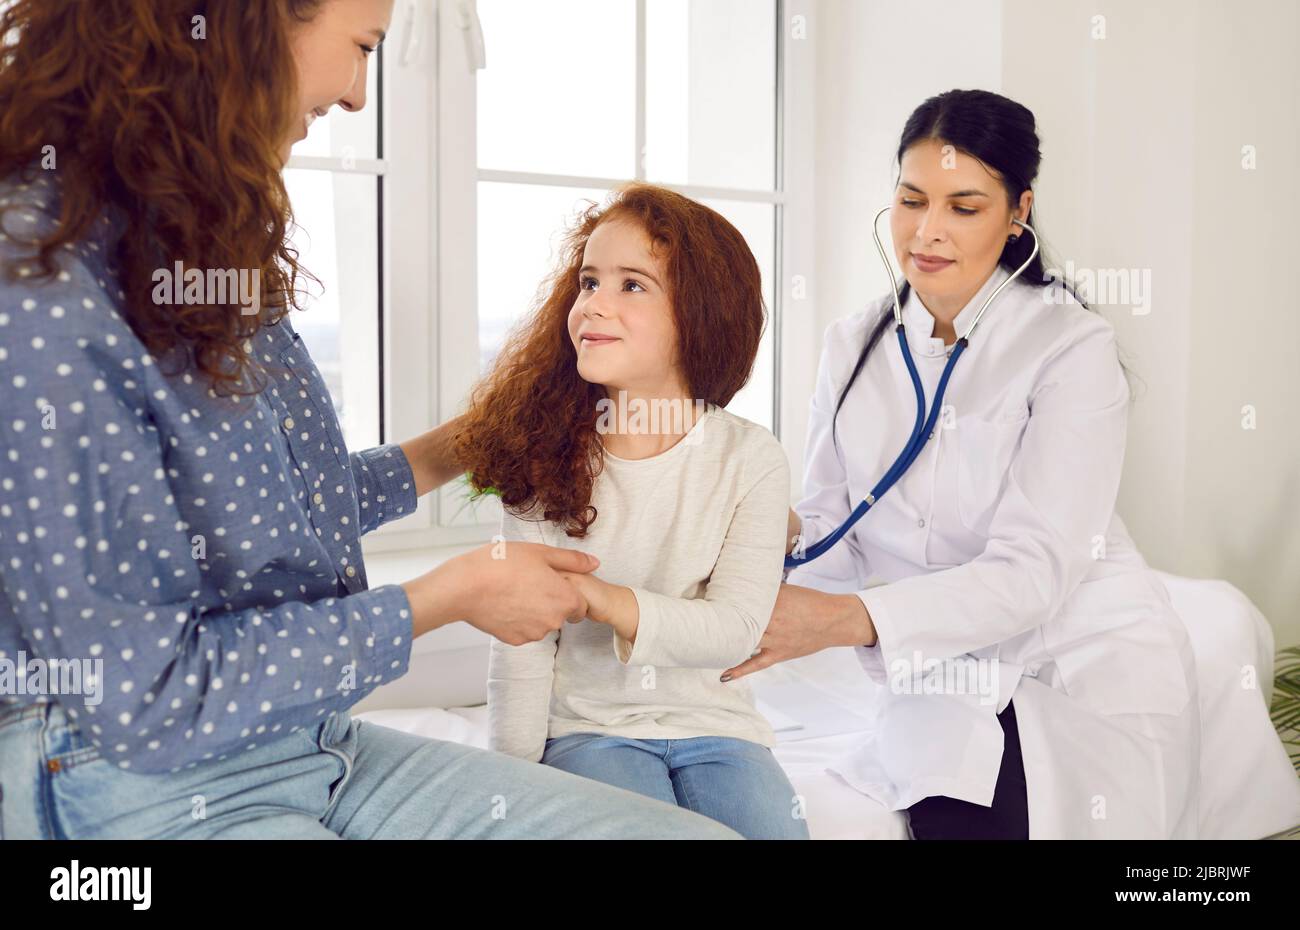 Female doctor puts stethoscope to child's back and listens to breathing and lungs of little girl. Stock Photo